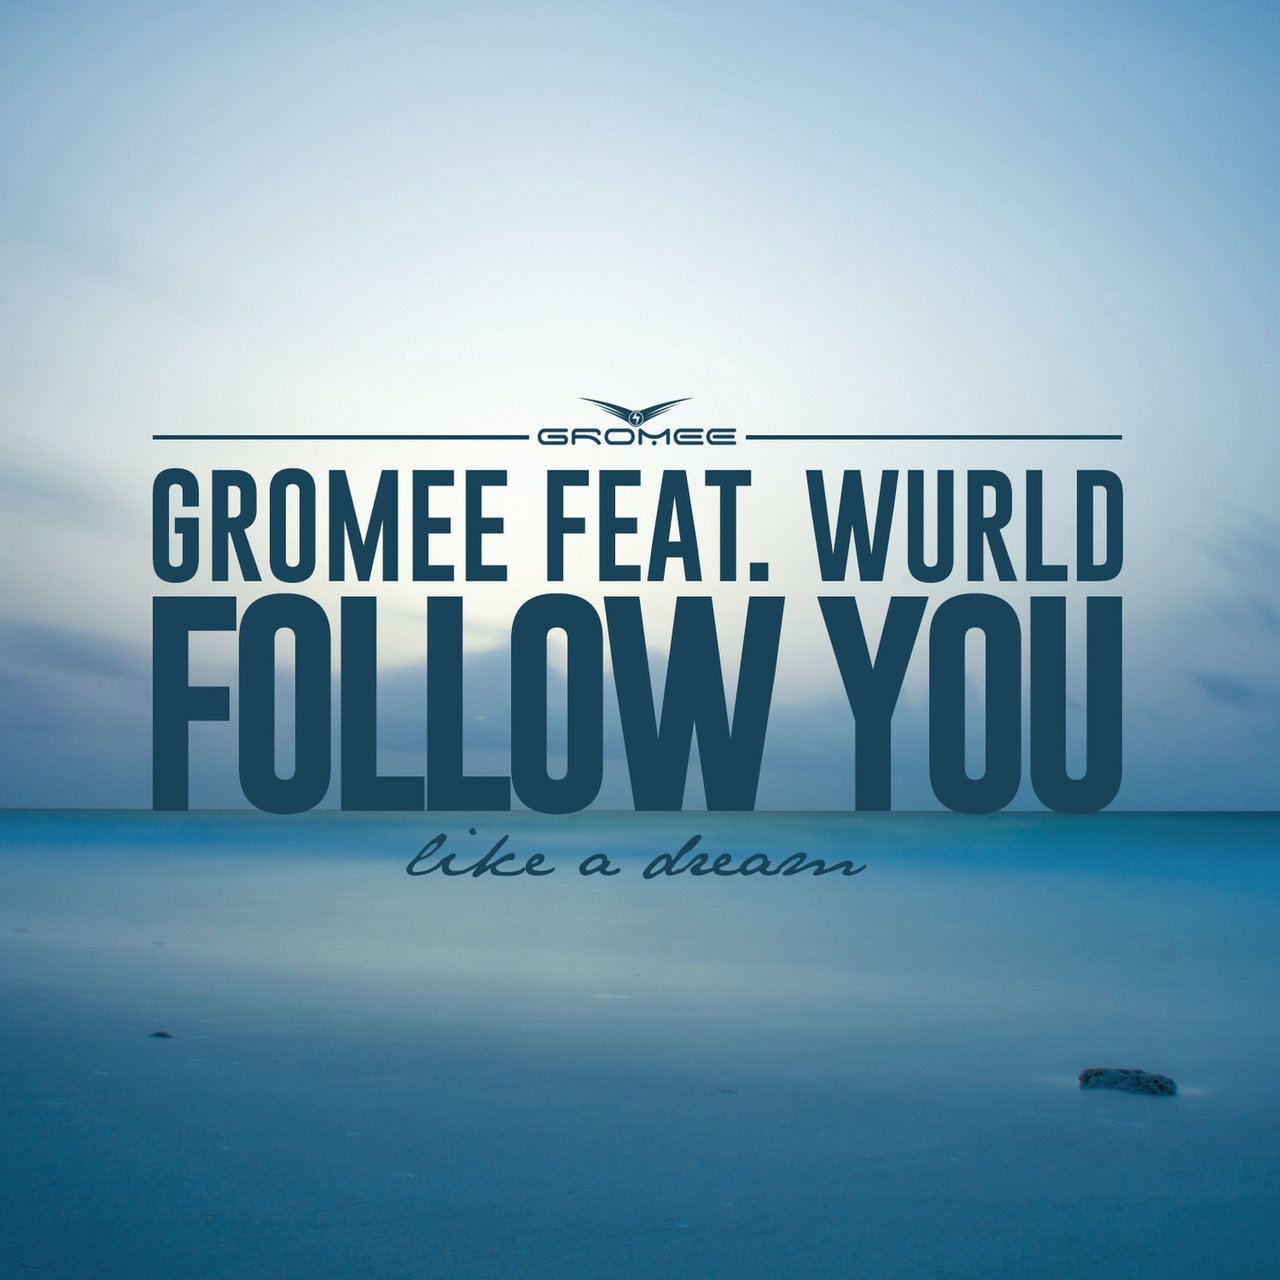 Gromee featuring WurlD — Follow You cover artwork